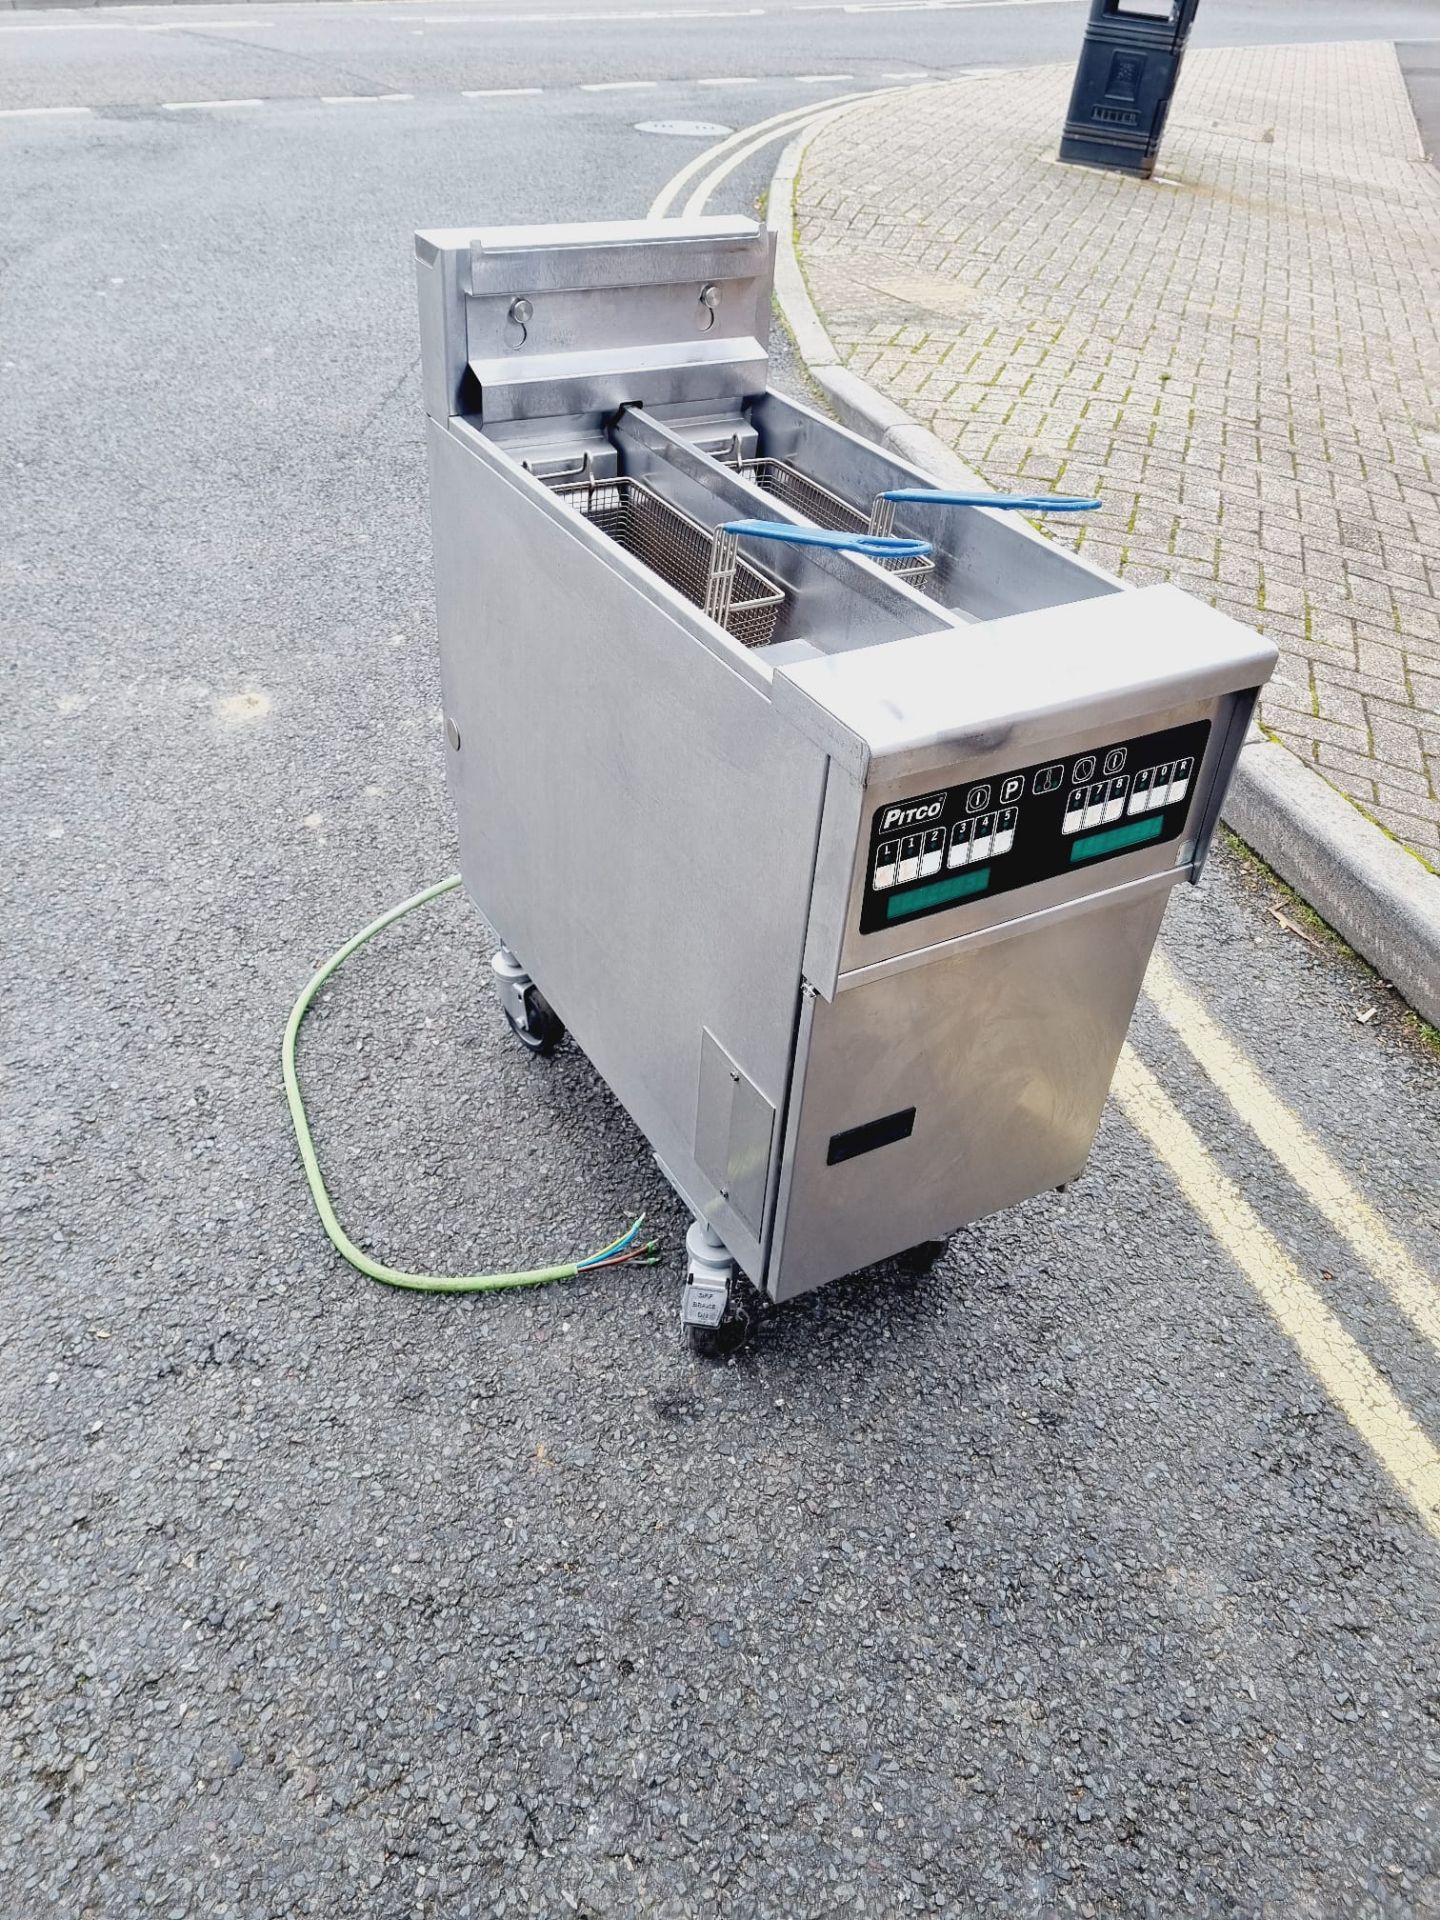 PITCO DOUBLE TANK DOUBLE BASKET - FULLY COMPUTER FRYER - 3 PHASE ELECTRIC - FULLY REFURBISHED  - Image 4 of 6